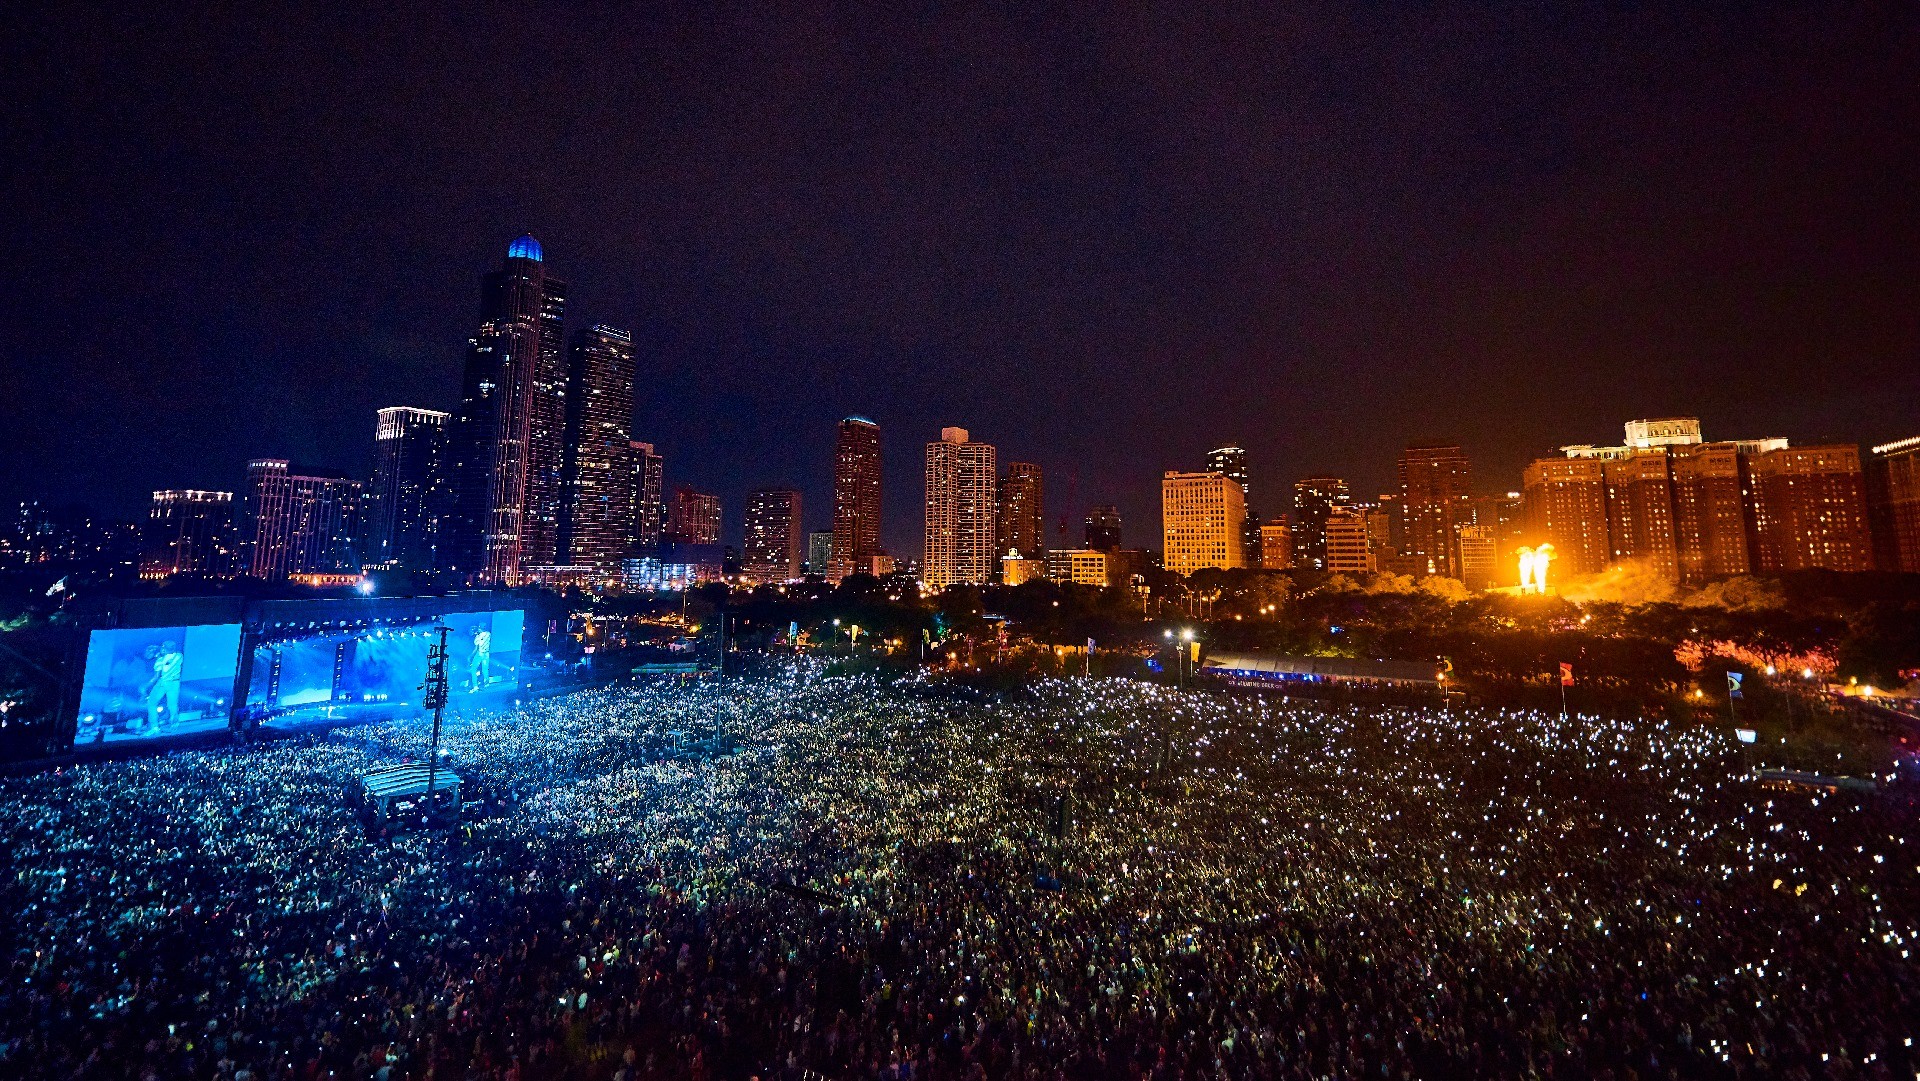 Lollapalooza Returns at Full-Capacity With an Epic Lineup